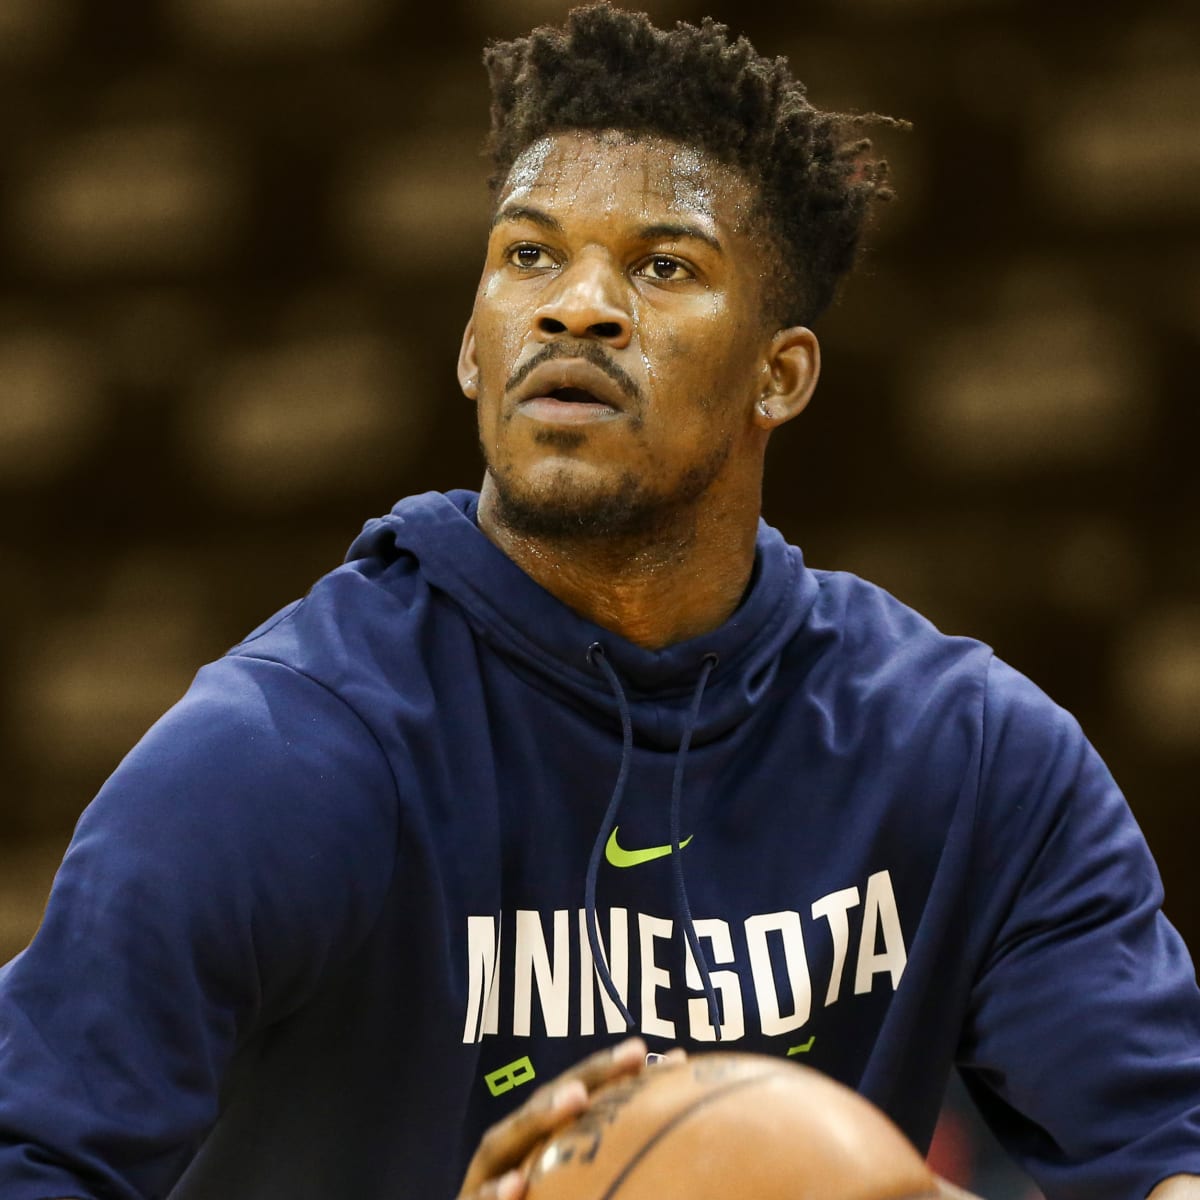 ESPN on X: Jimmy Butler had some pointed words for Timberwolves